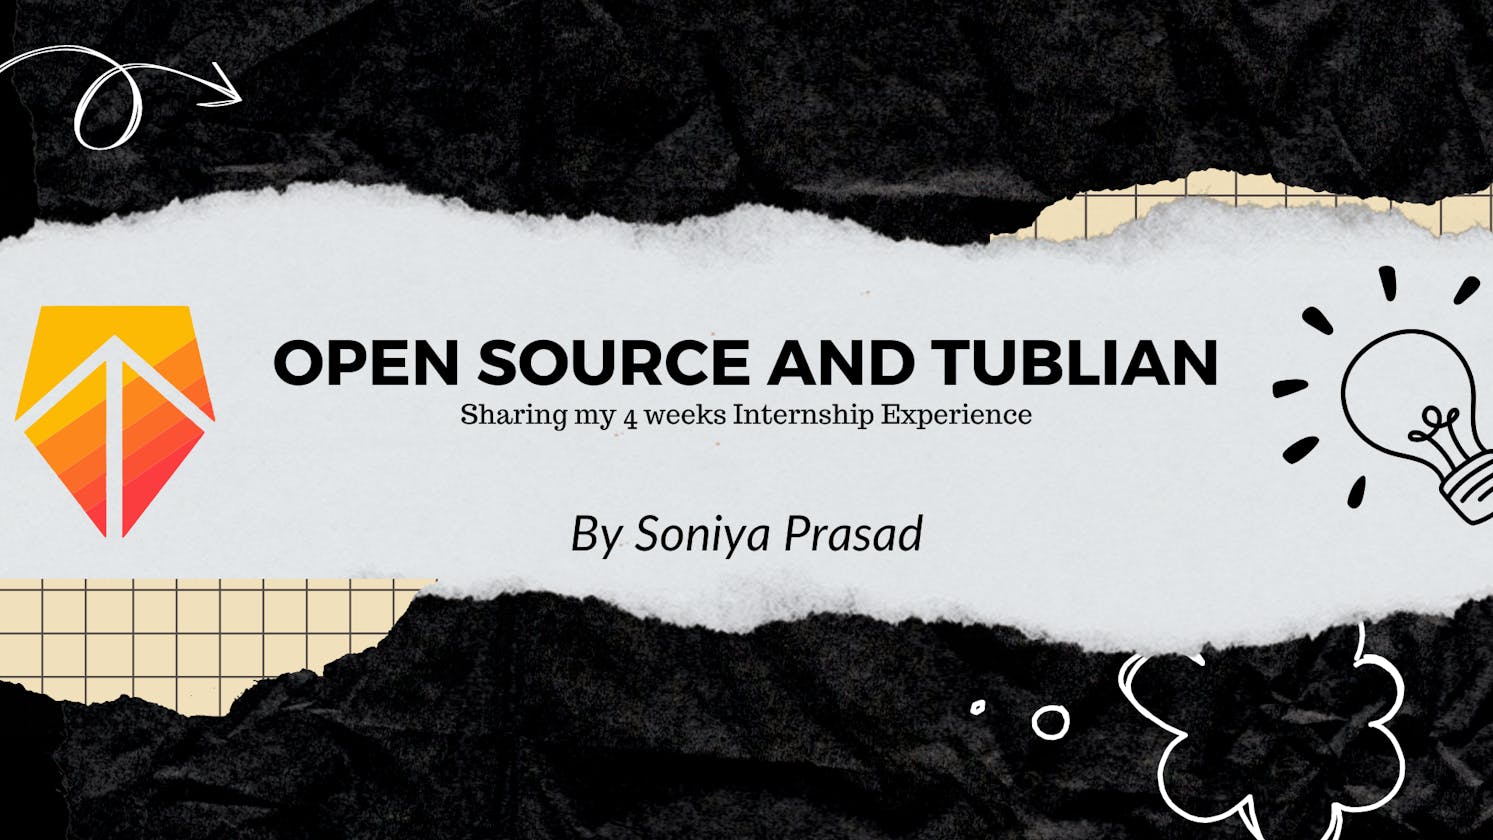 My Journey: From Intern to Open Source Contributor